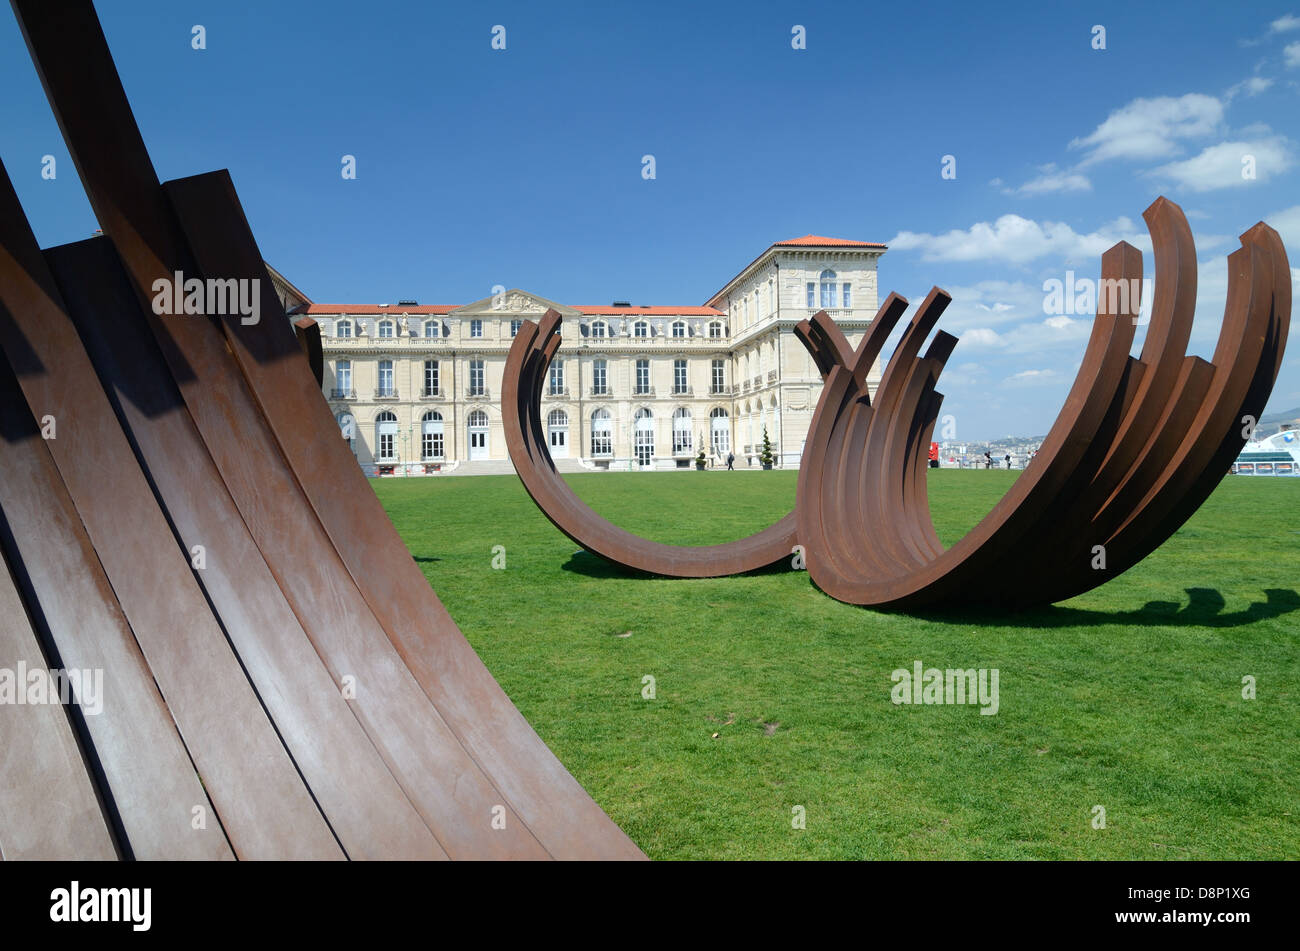 Palais du Pharo or Pharo Palace Park and Gardens with Monumental Metal Sculptures 'Désordre' by Bernar Venet Marseille France Stock Photo